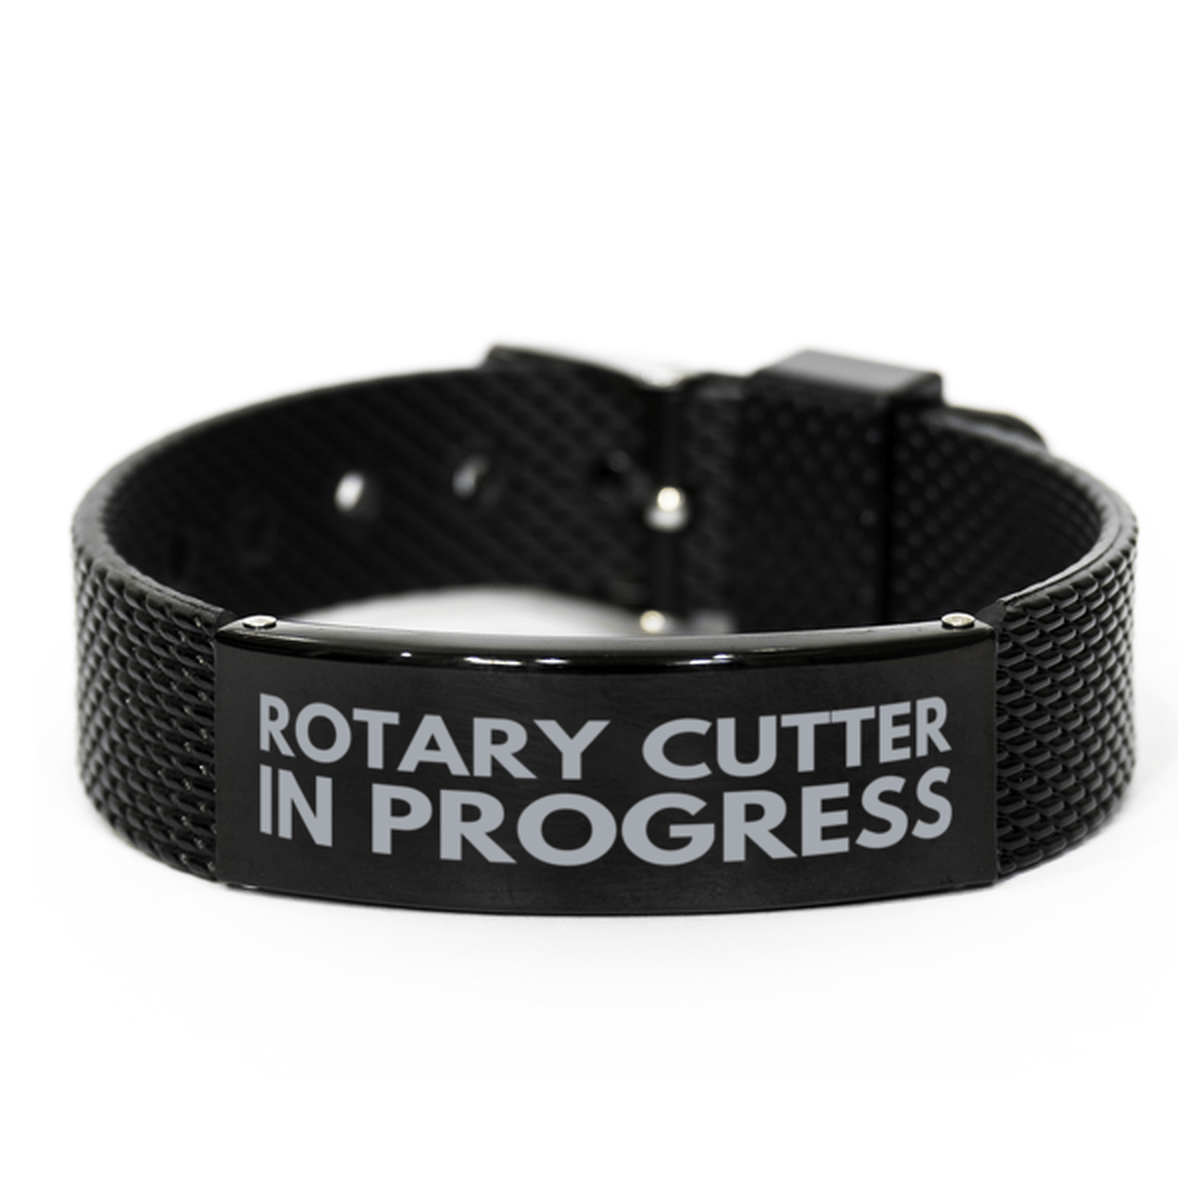 Inspirational Rotary Cutter Black Shark Mesh Bracelet, Rotary Cutter In Progress, Best Graduation Gifts for Students